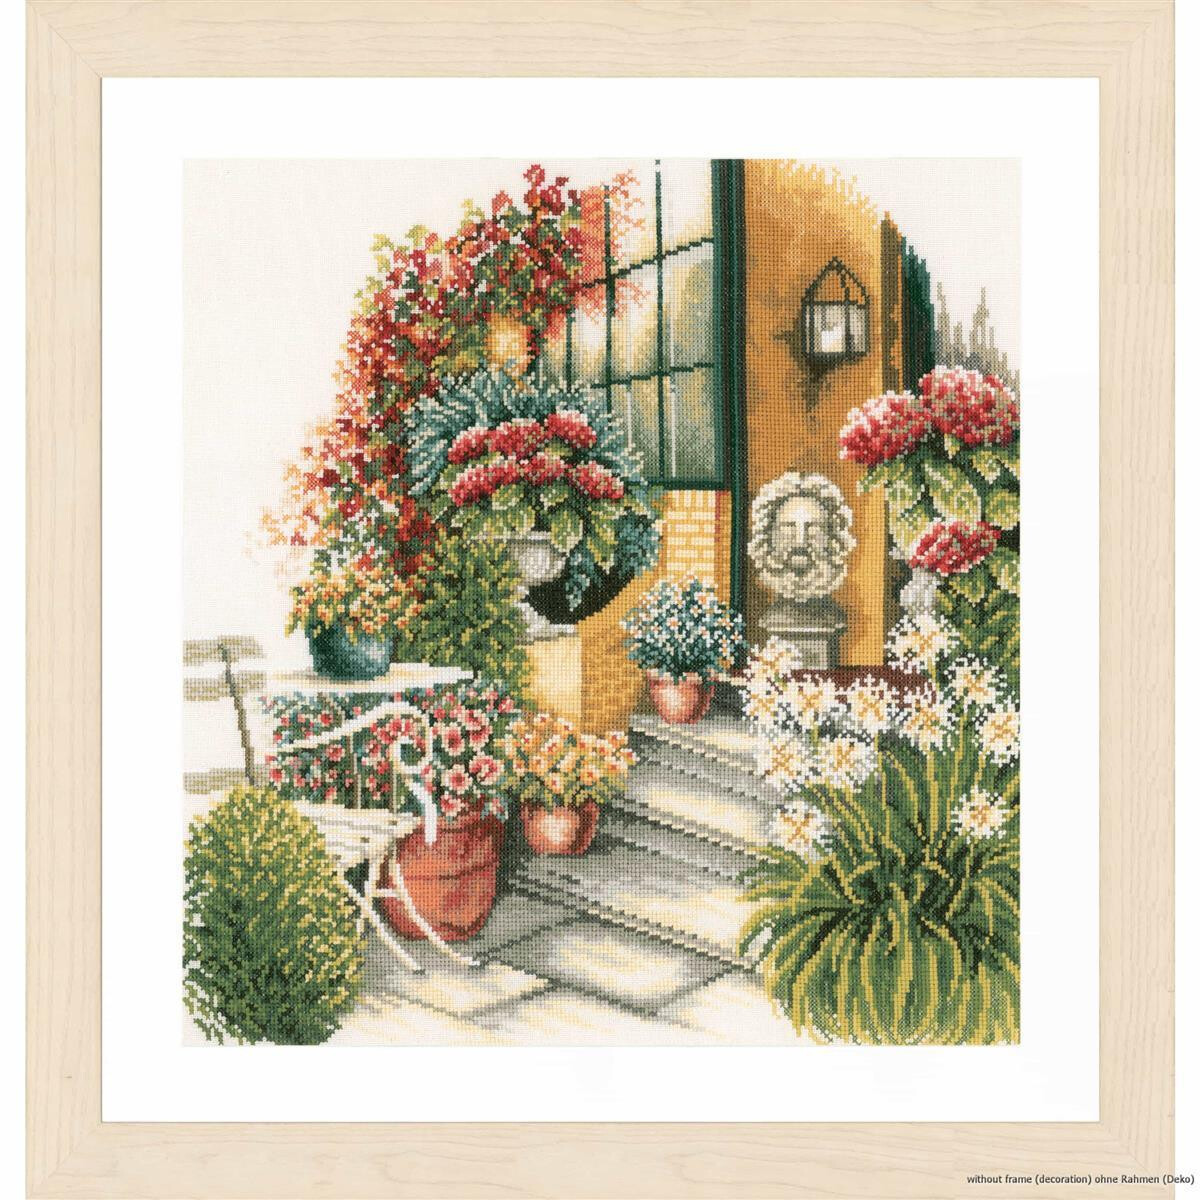 A cross stitch artwork from Lanartes embroidery pack...